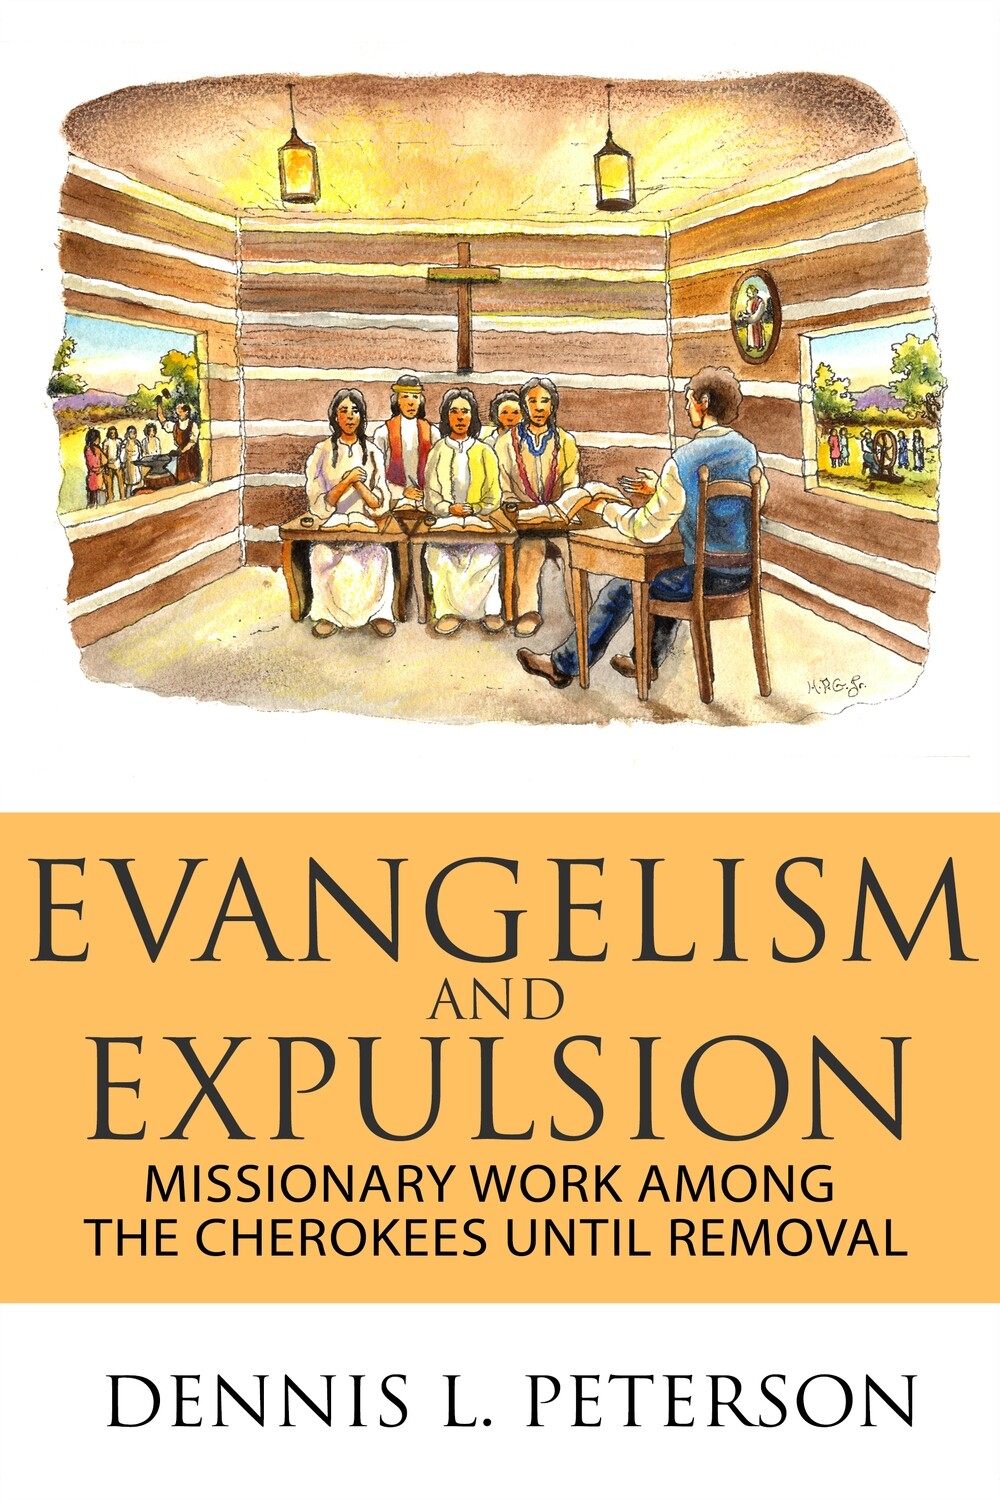 EVANGELISM AND EXPULSION: Missionary Work Among the Cherokees Until Removal